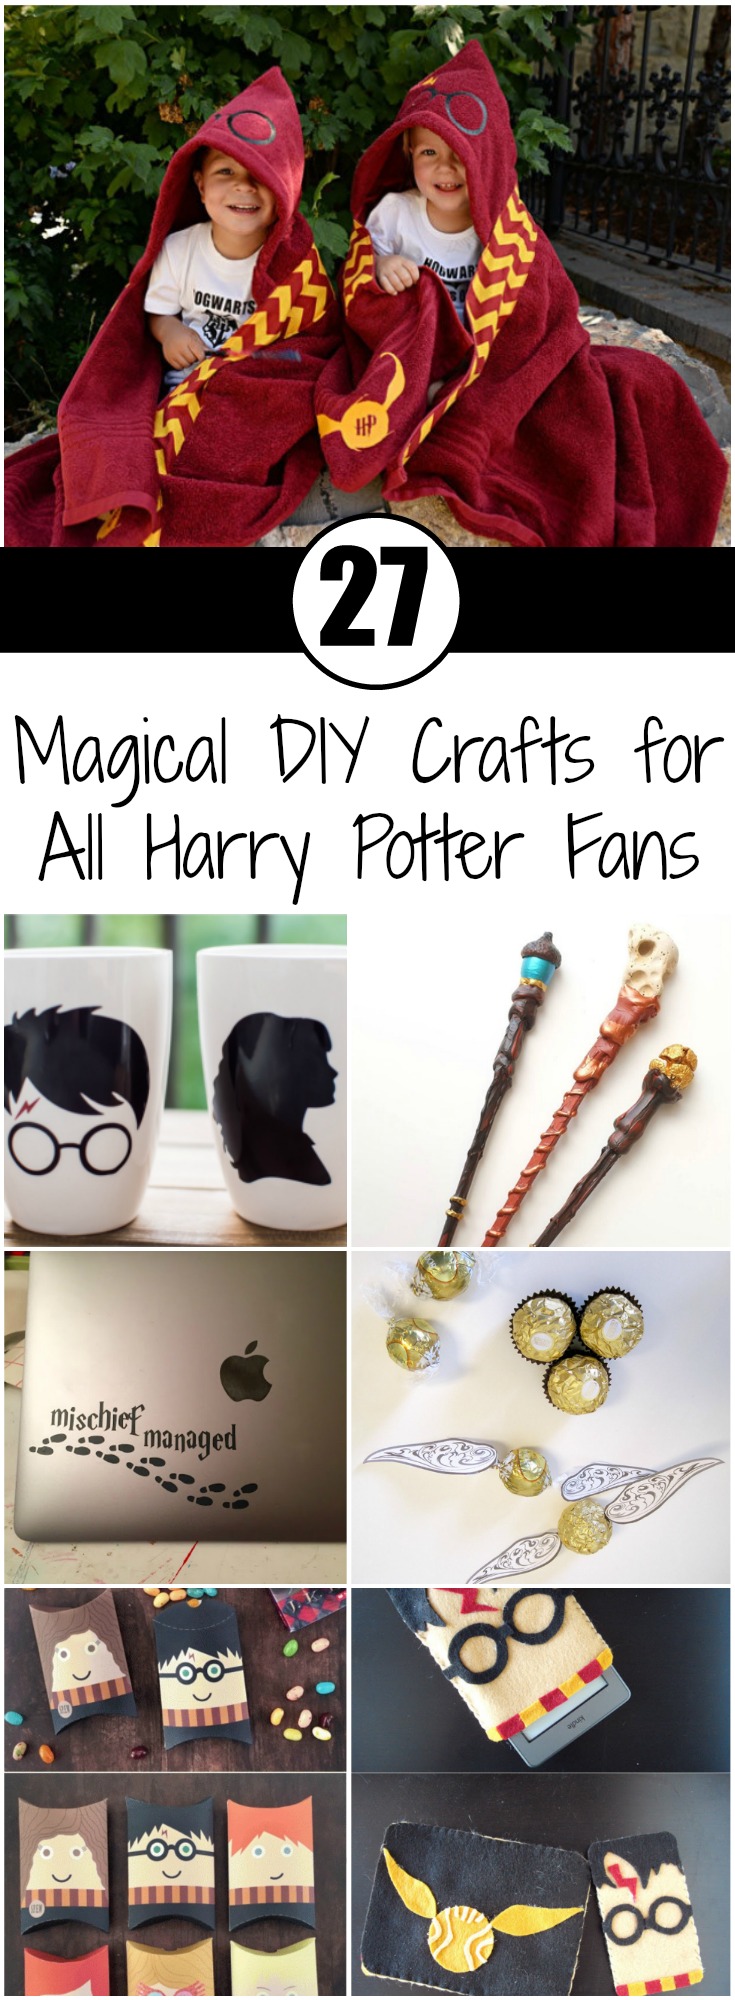 27 Magical DIY Crafts for All Harry Potter Fans